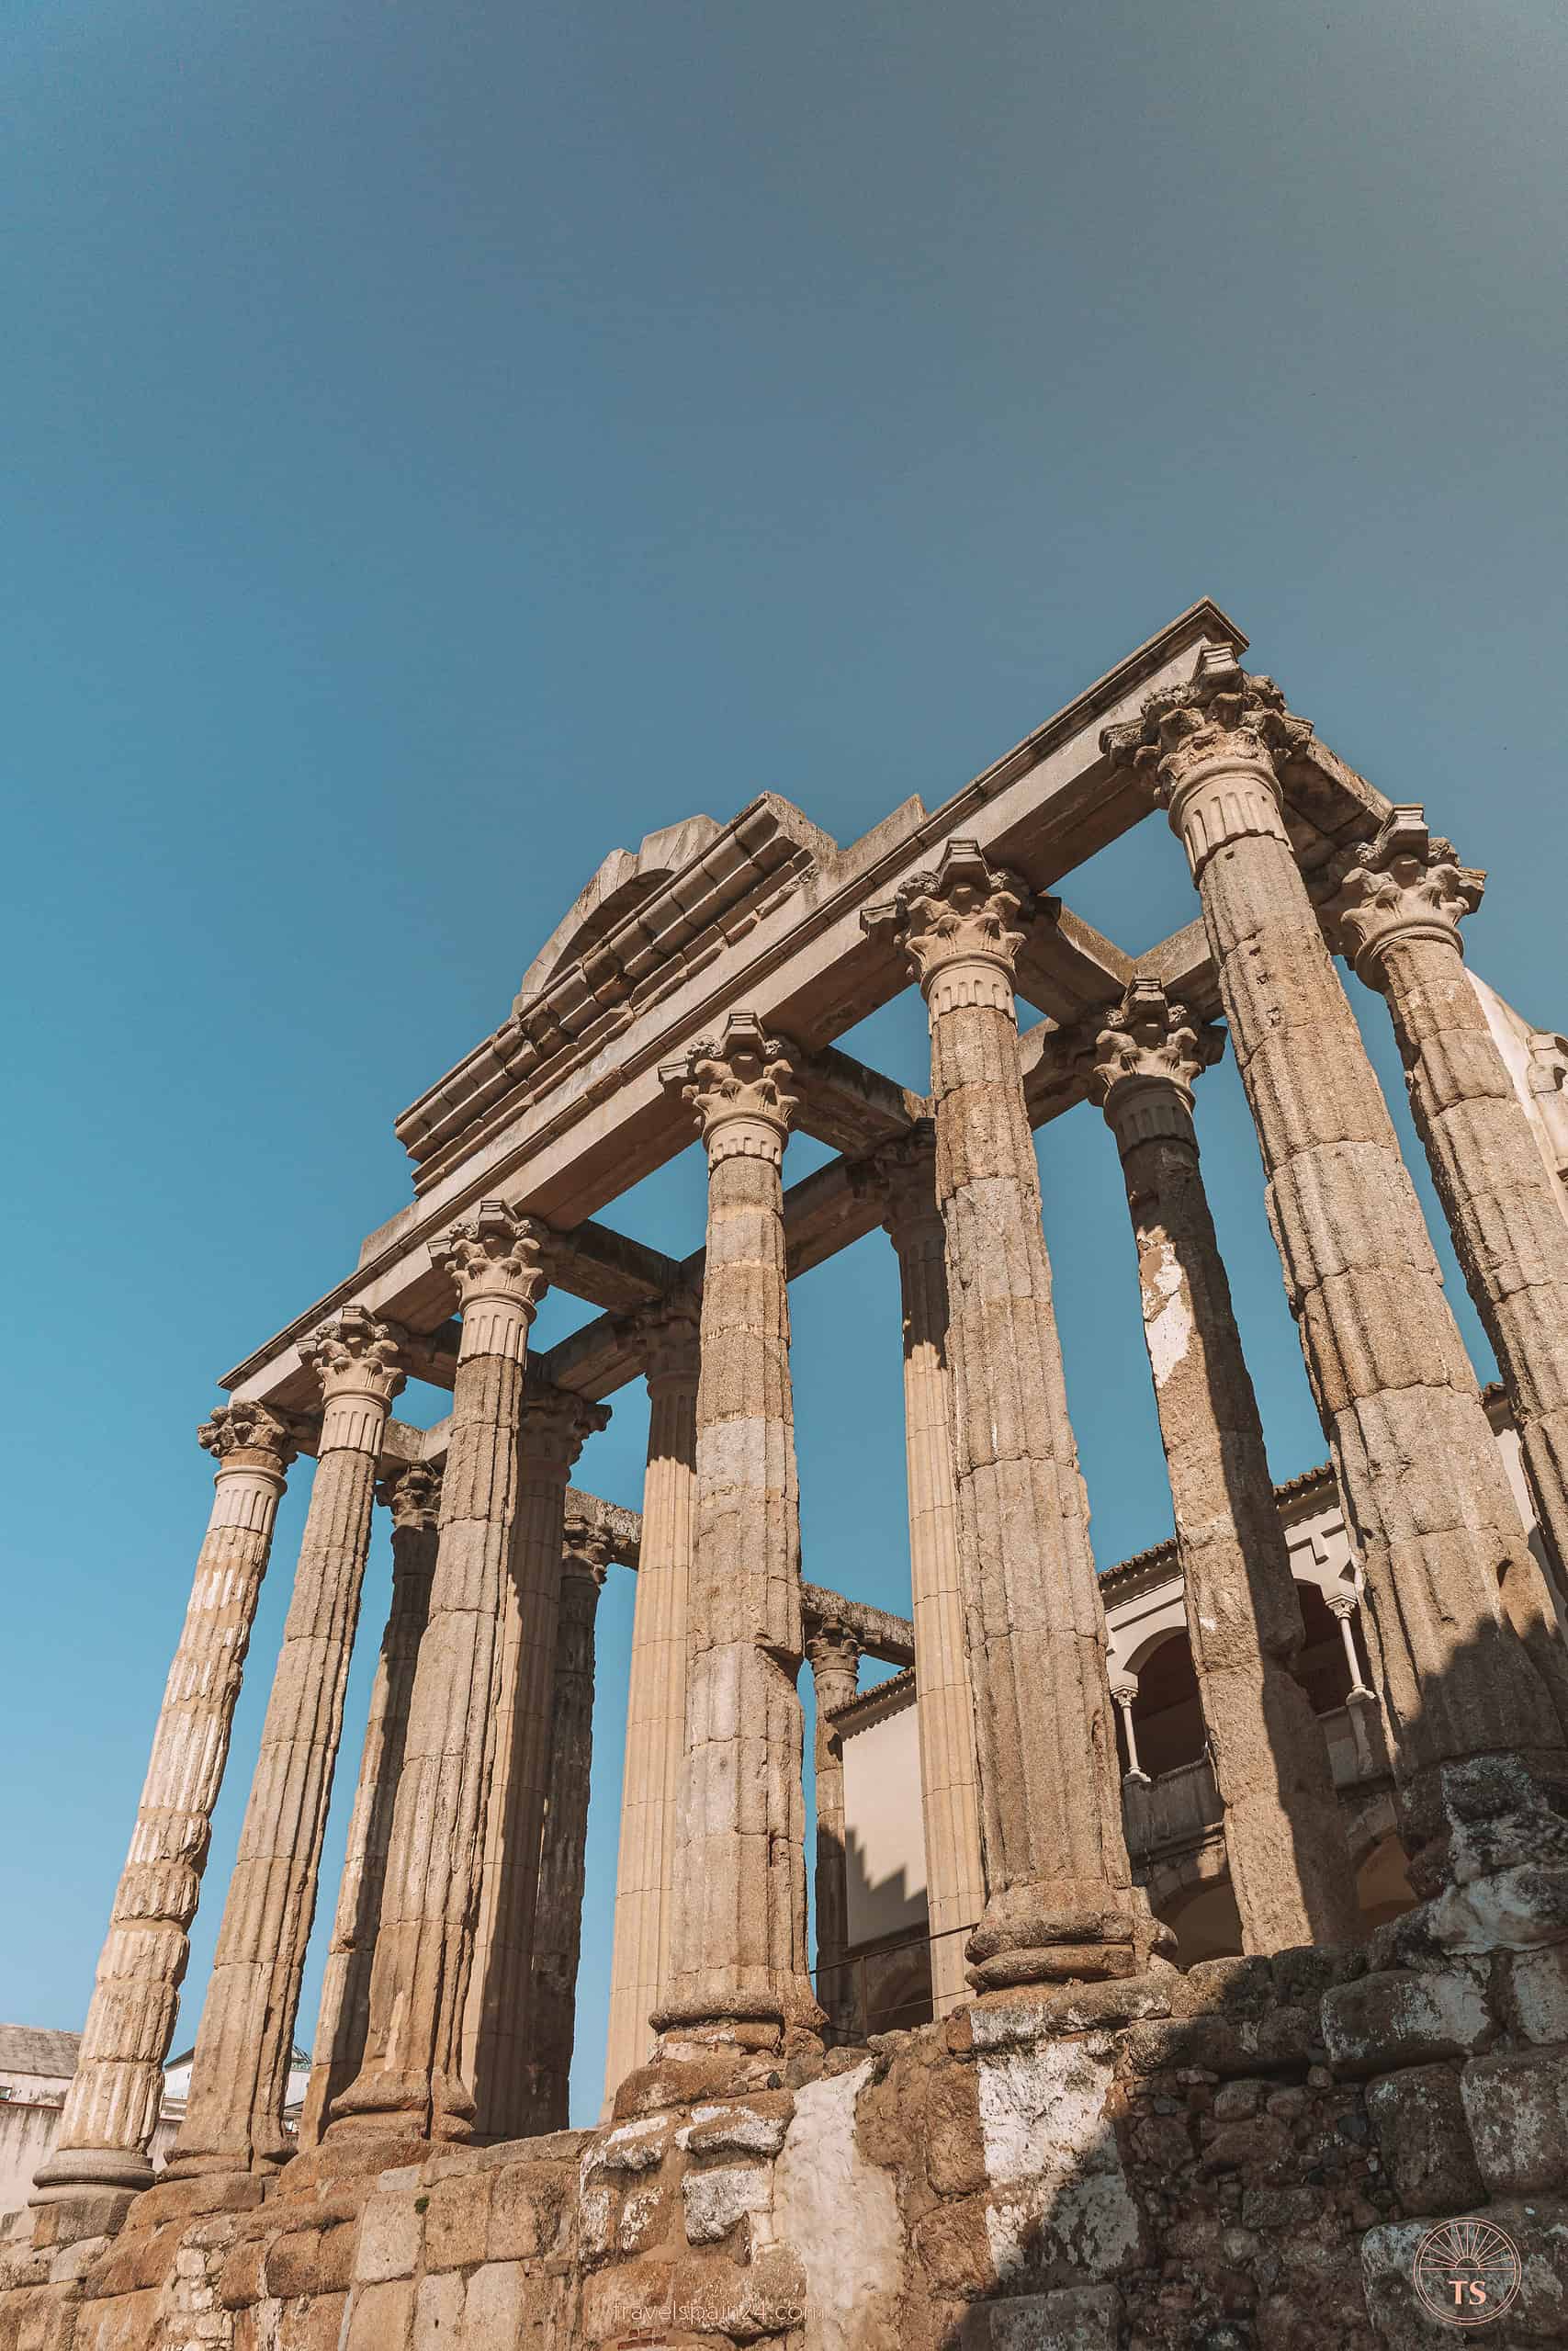 Close-up of the Temple of Diana, an ancient Roman temple in downtown Mérida, showcasing the enduring legacy of Roman architecture in the city.